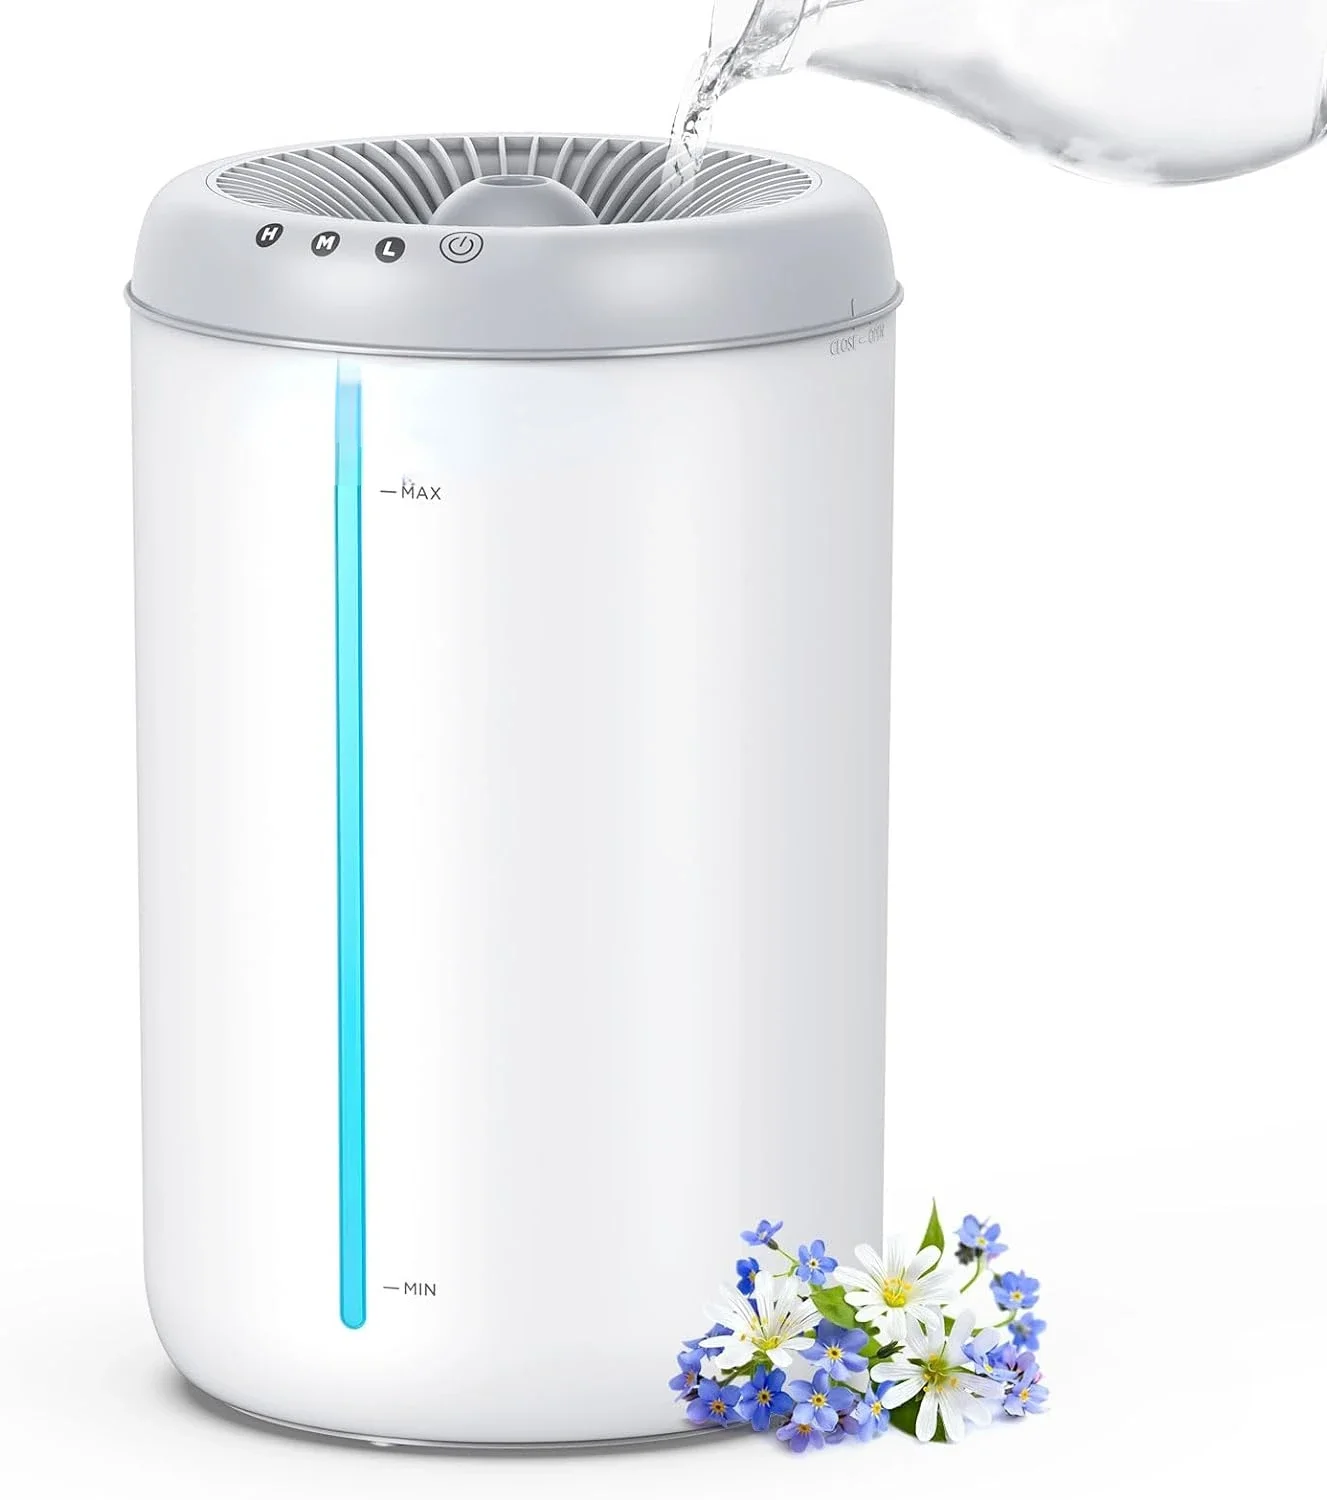 

Large Capacity 4.5L Cool Mist Humidifiers, Top Fill Air Humidifier for Large Room, Quiet Humidifier with Nightlight, Perfect for